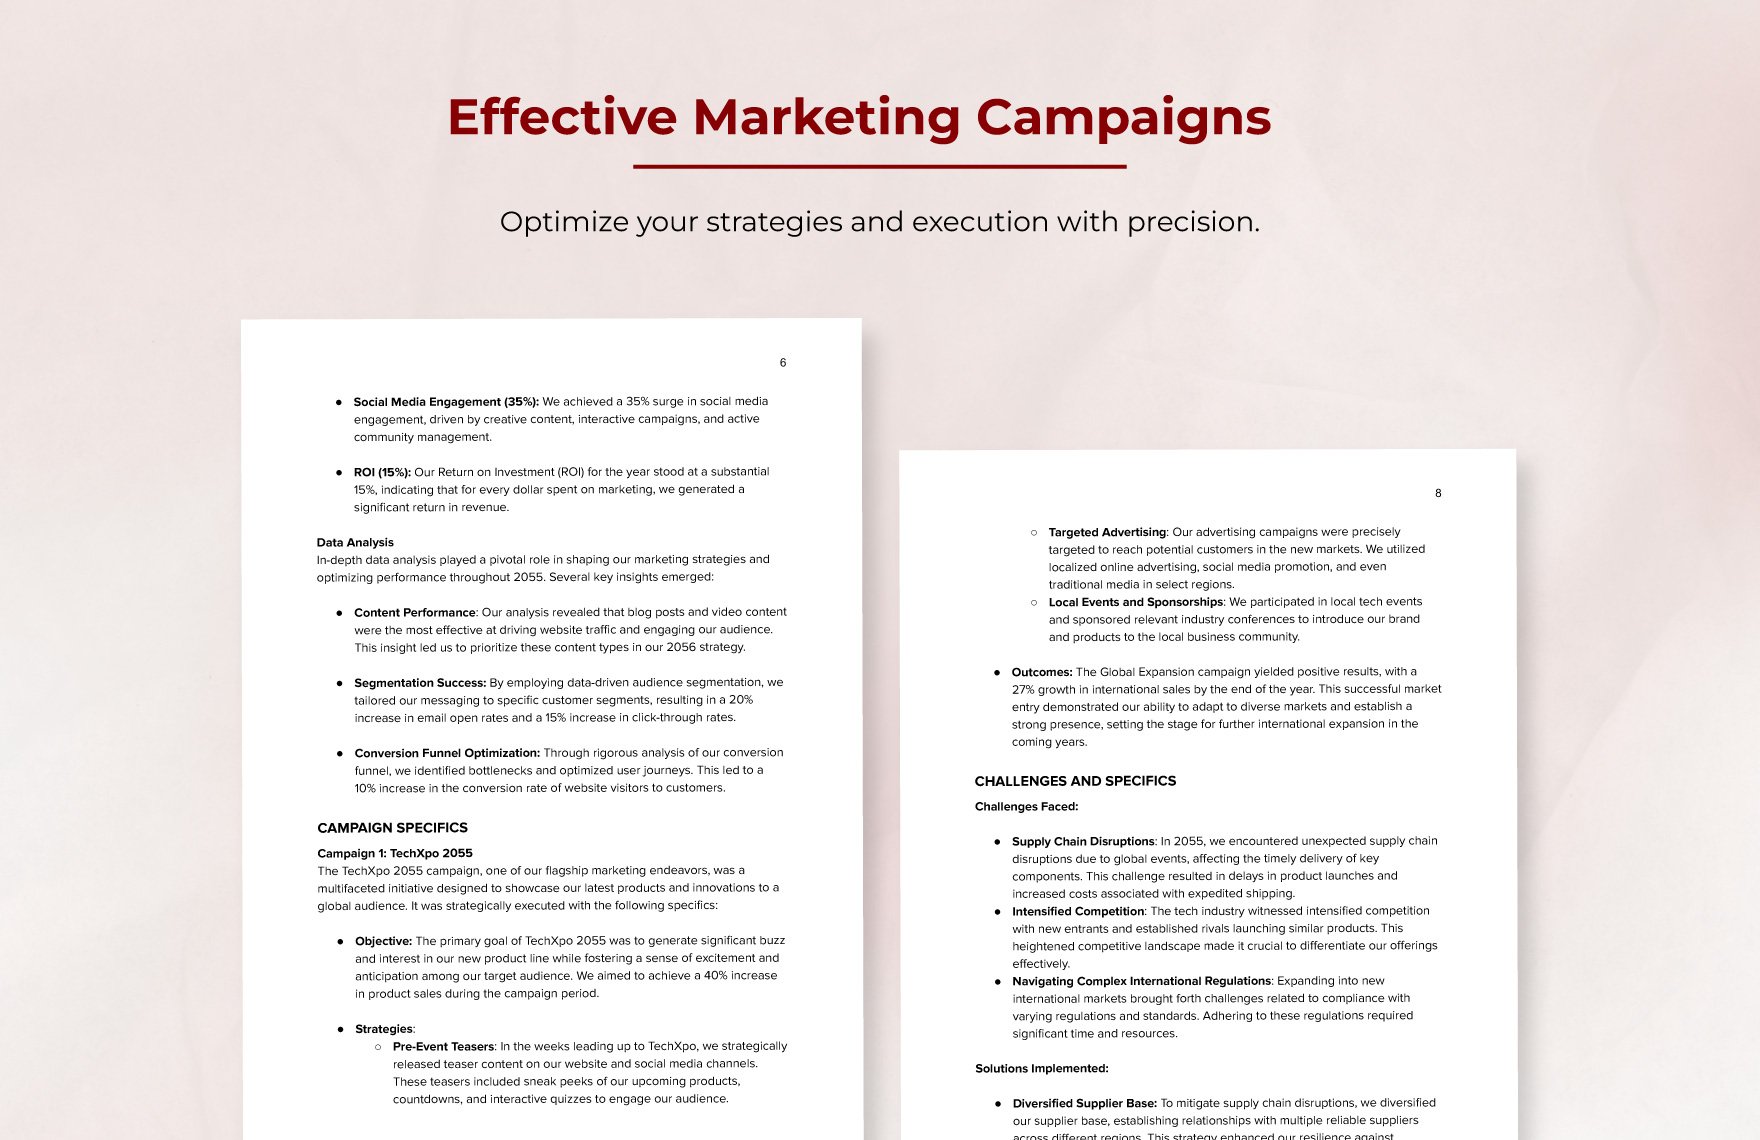 Marketing End-of-Year Report Template